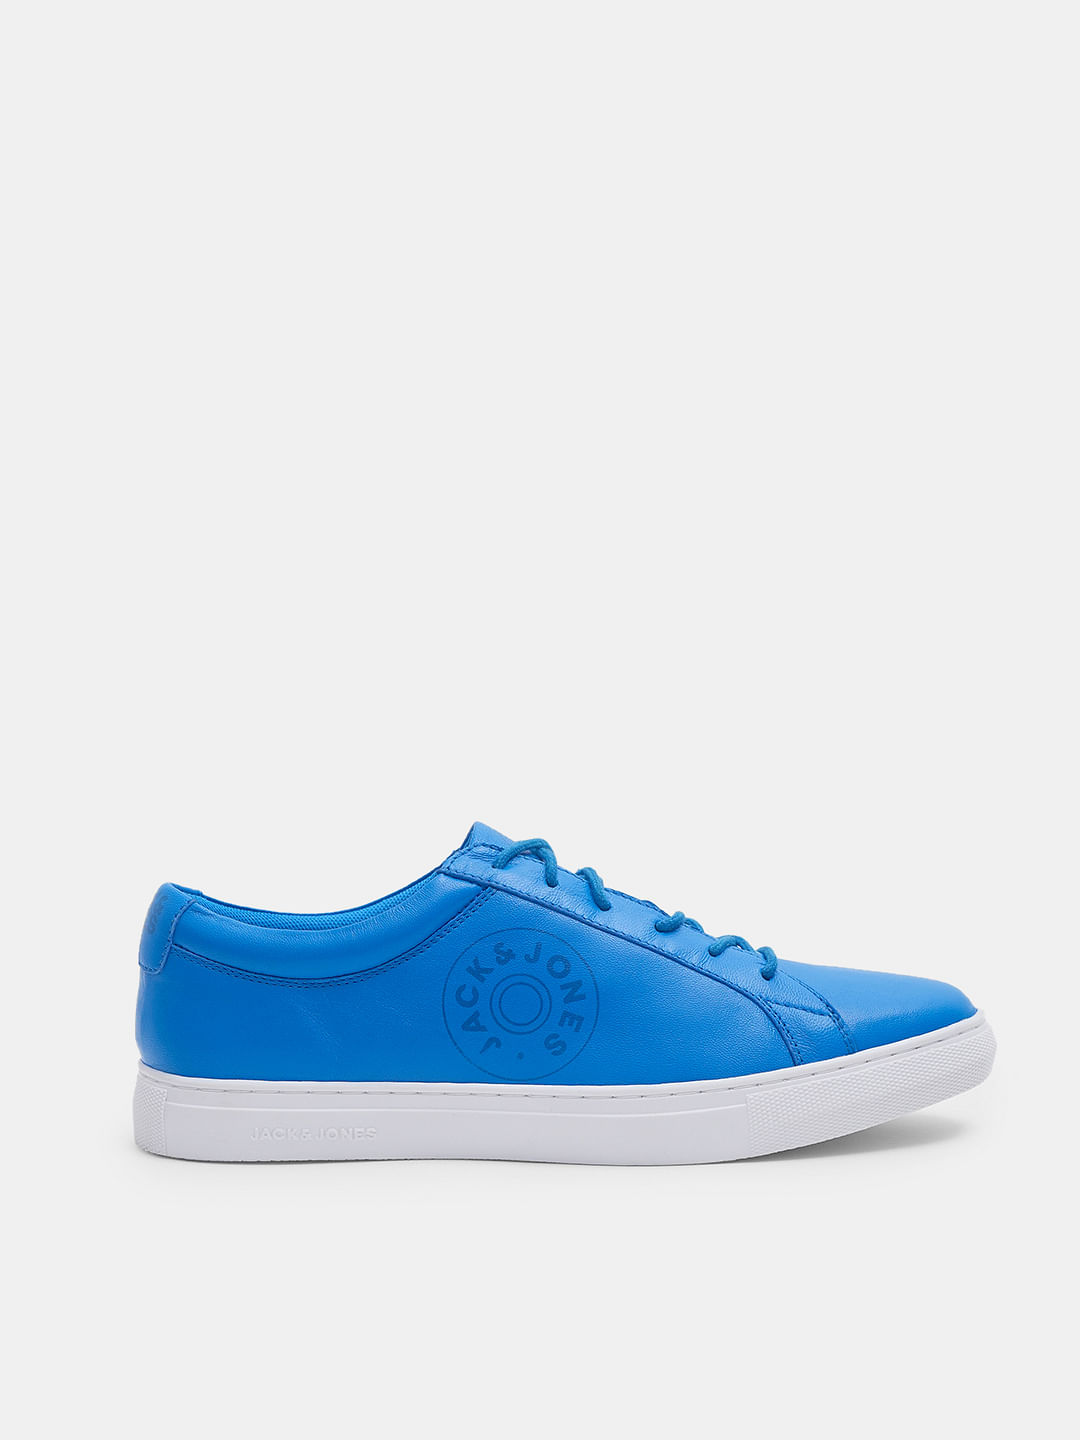 Aggregate more than 201 blue colour sneakers shoes super hot